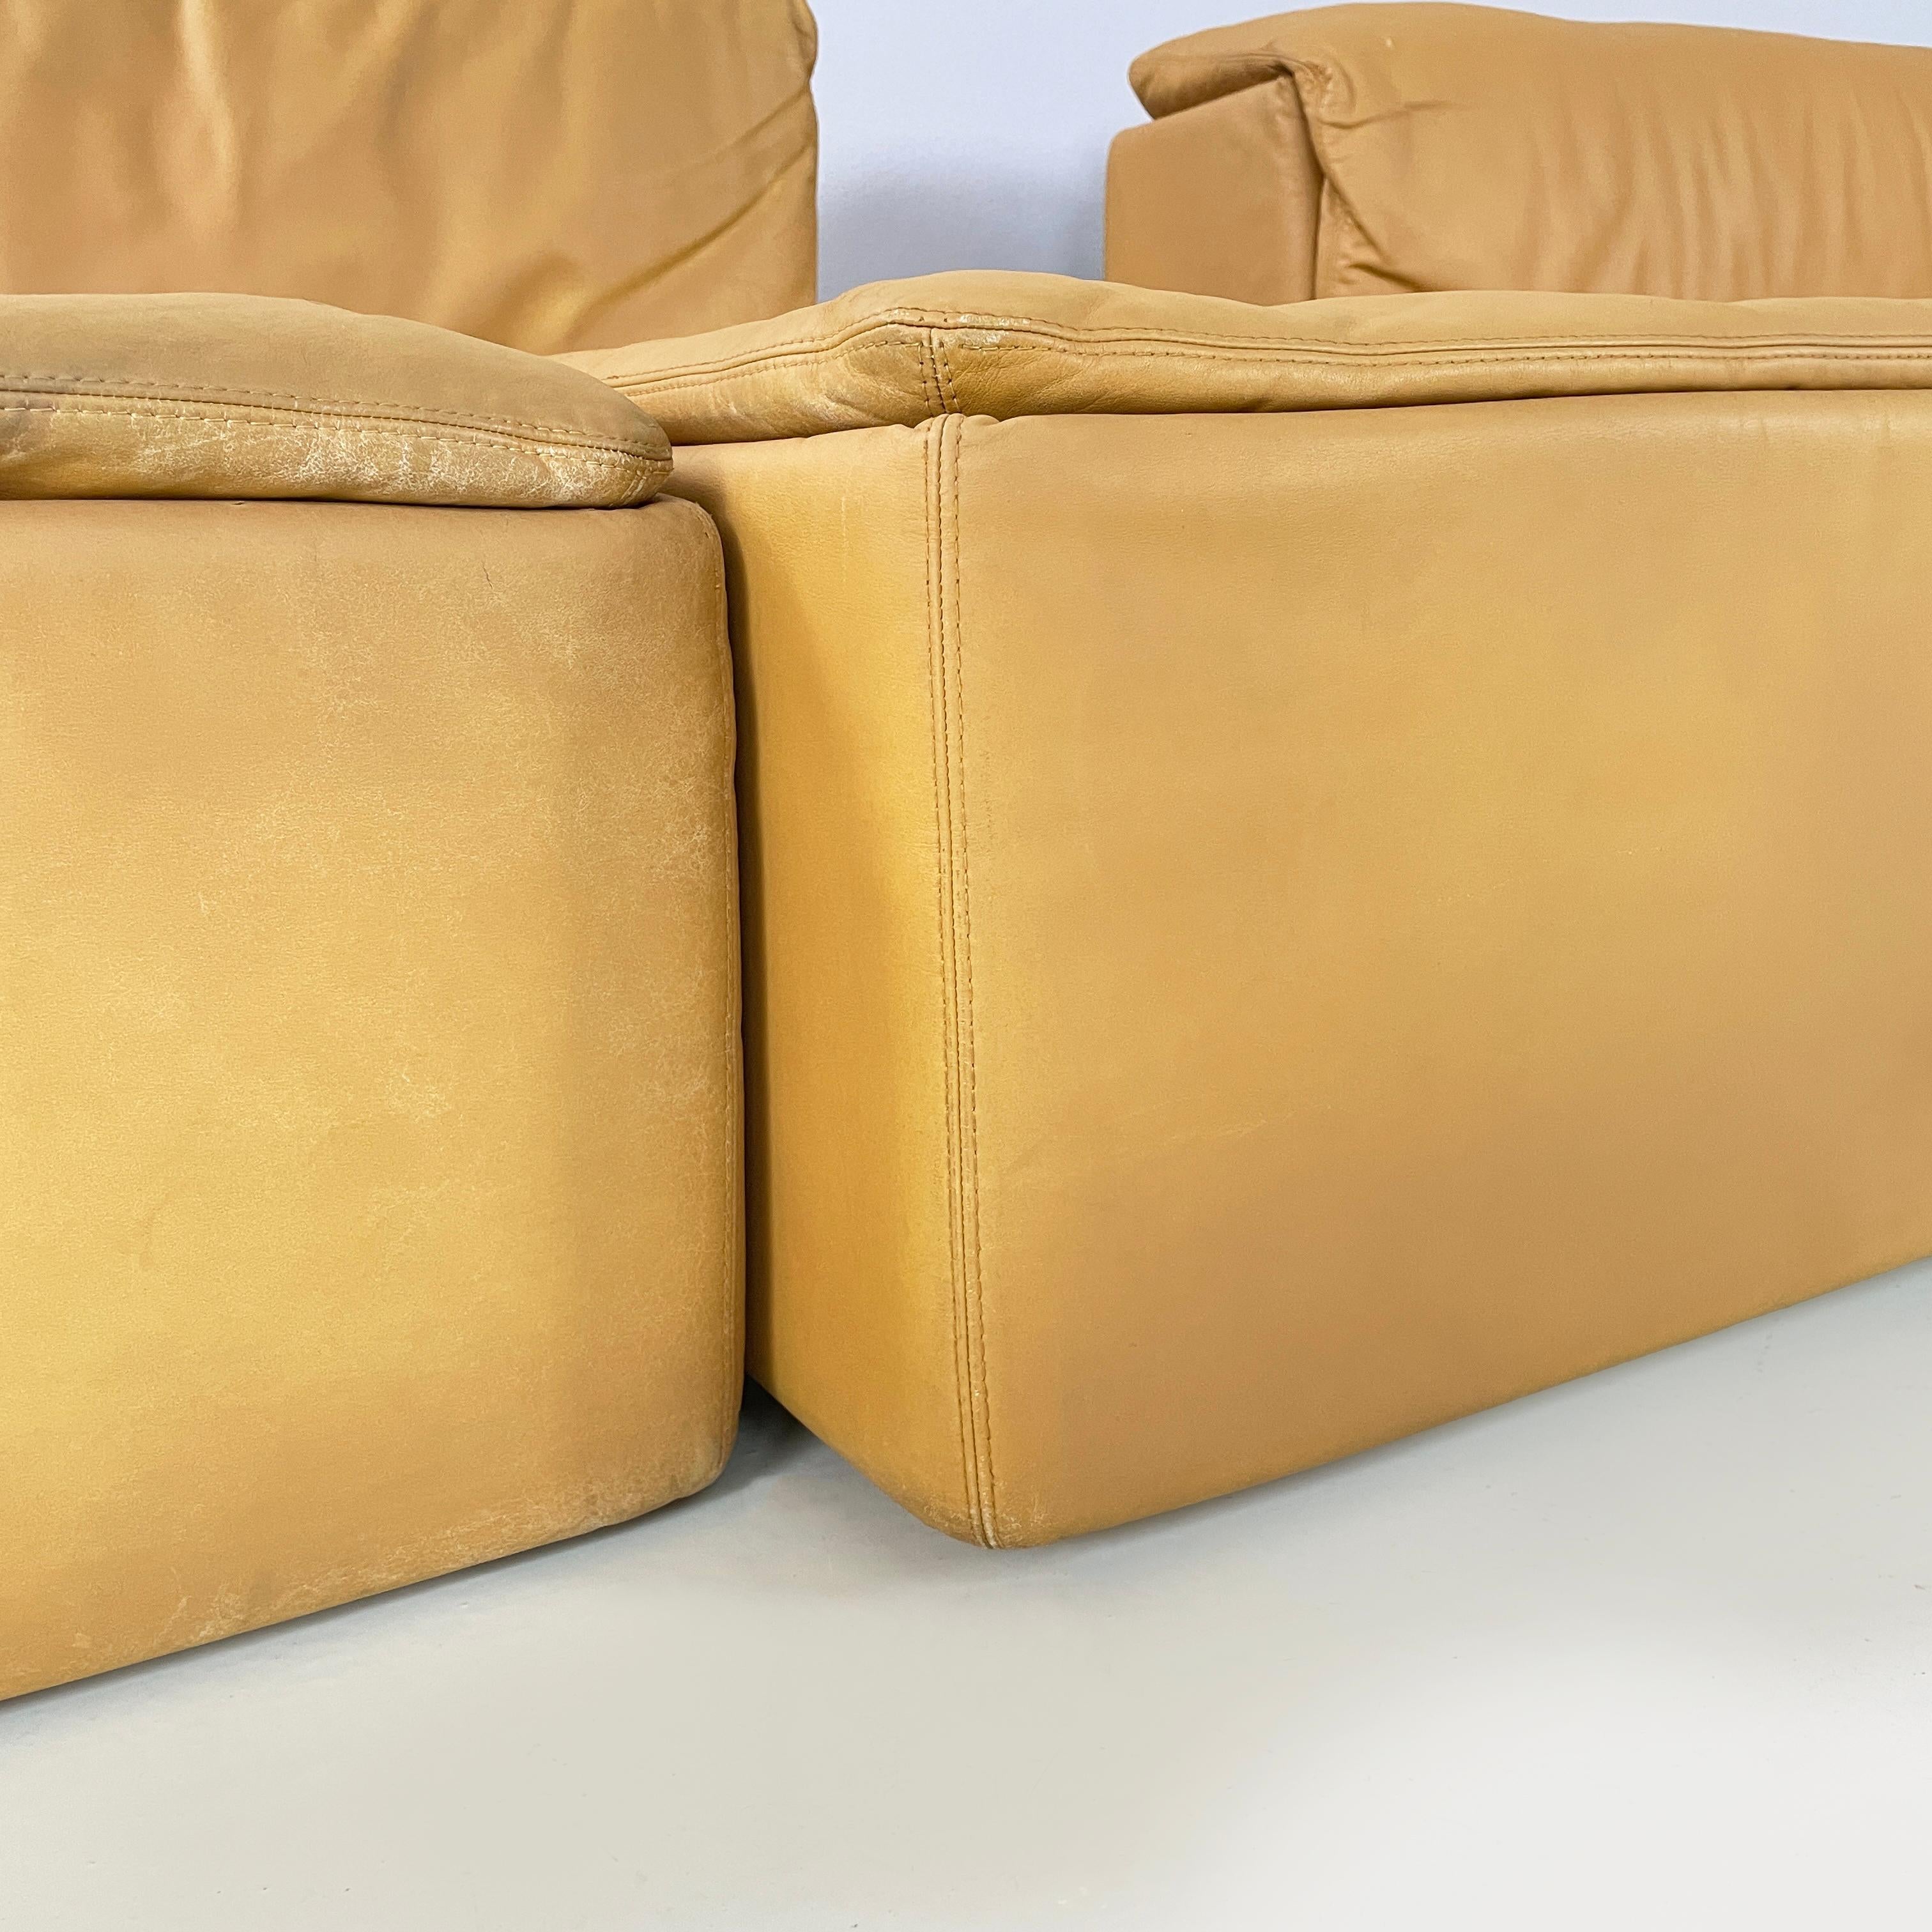 Italian modern Brown leather modular sofa Paione by Salocchi for Sormani, 1970s For Sale 10